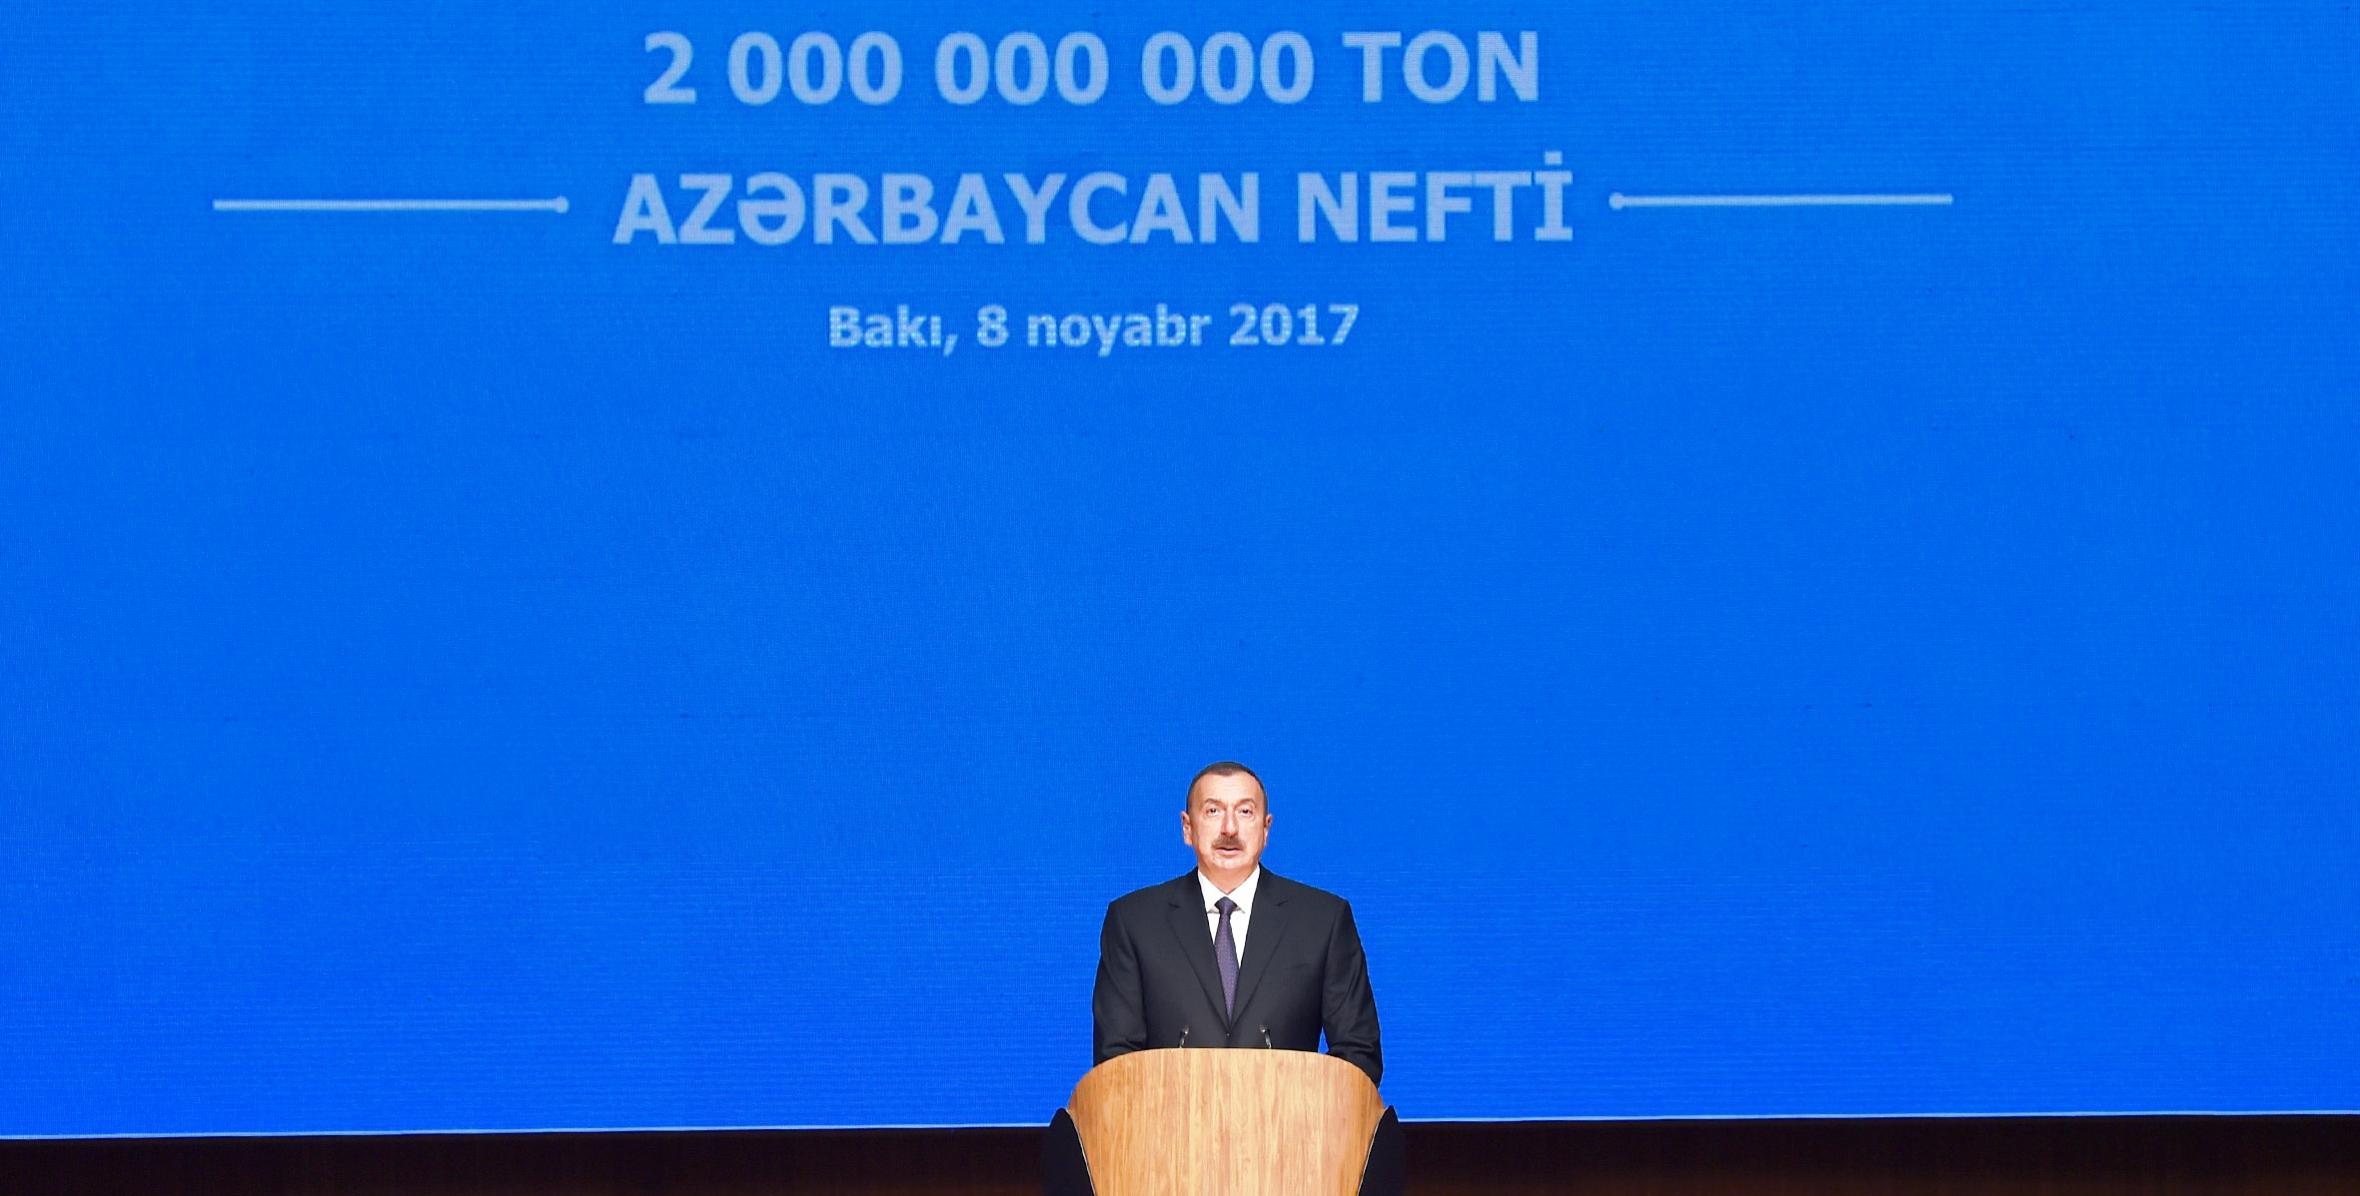 Speech by Ilham Aliyev at  the solemn ceremony celebrating two billion tons of oil production in Azerbaijan